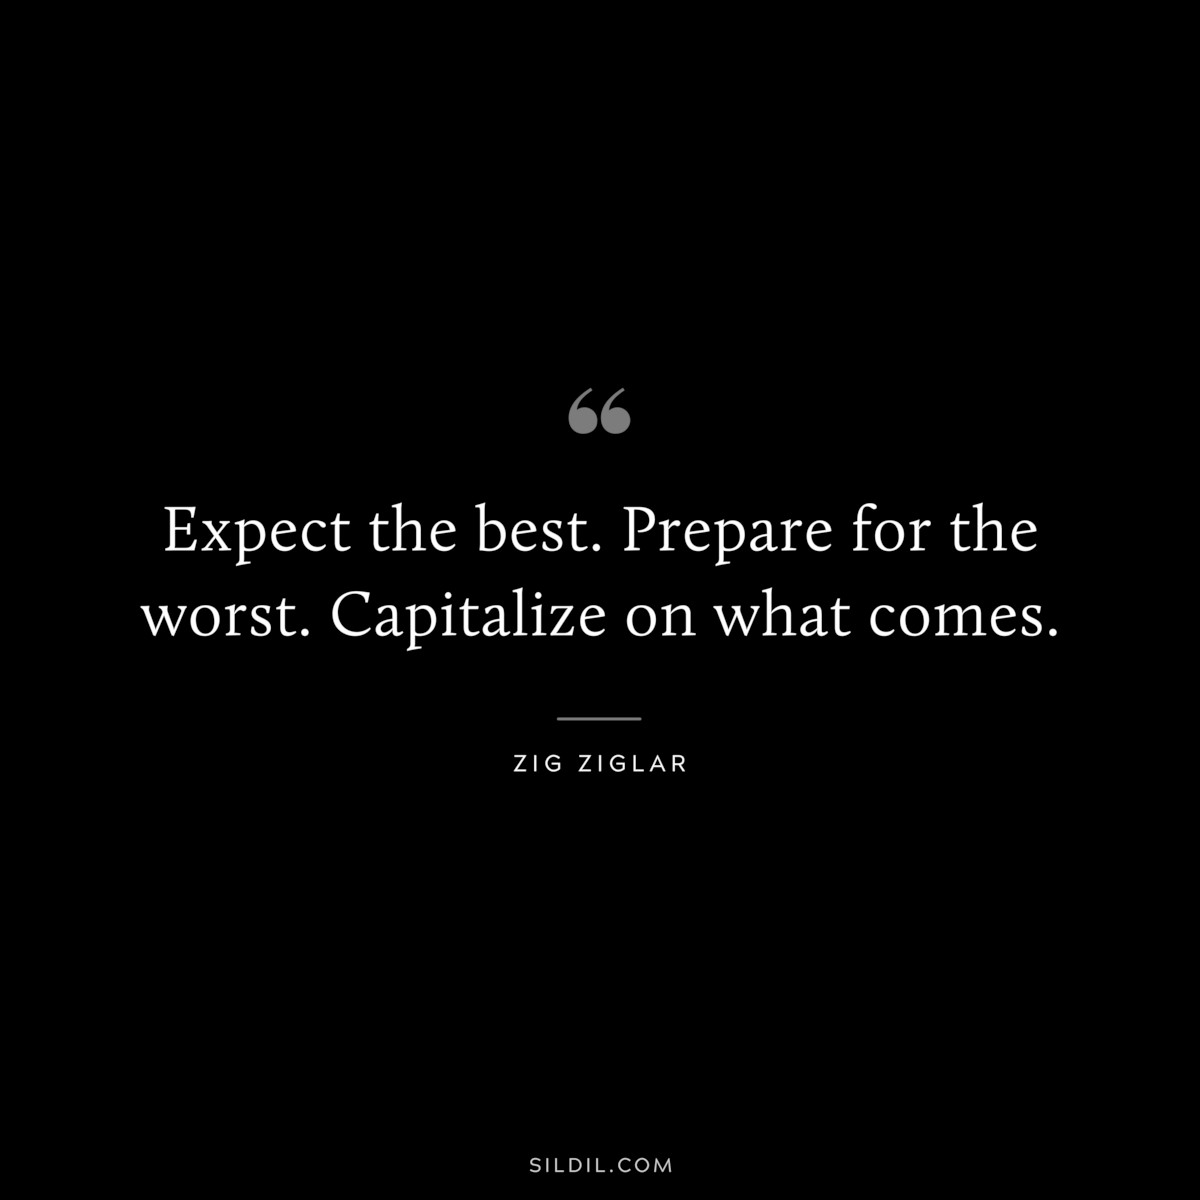 Expect the best. Prepare for the worst. Capitalize on what comes. ― Zig Ziglar